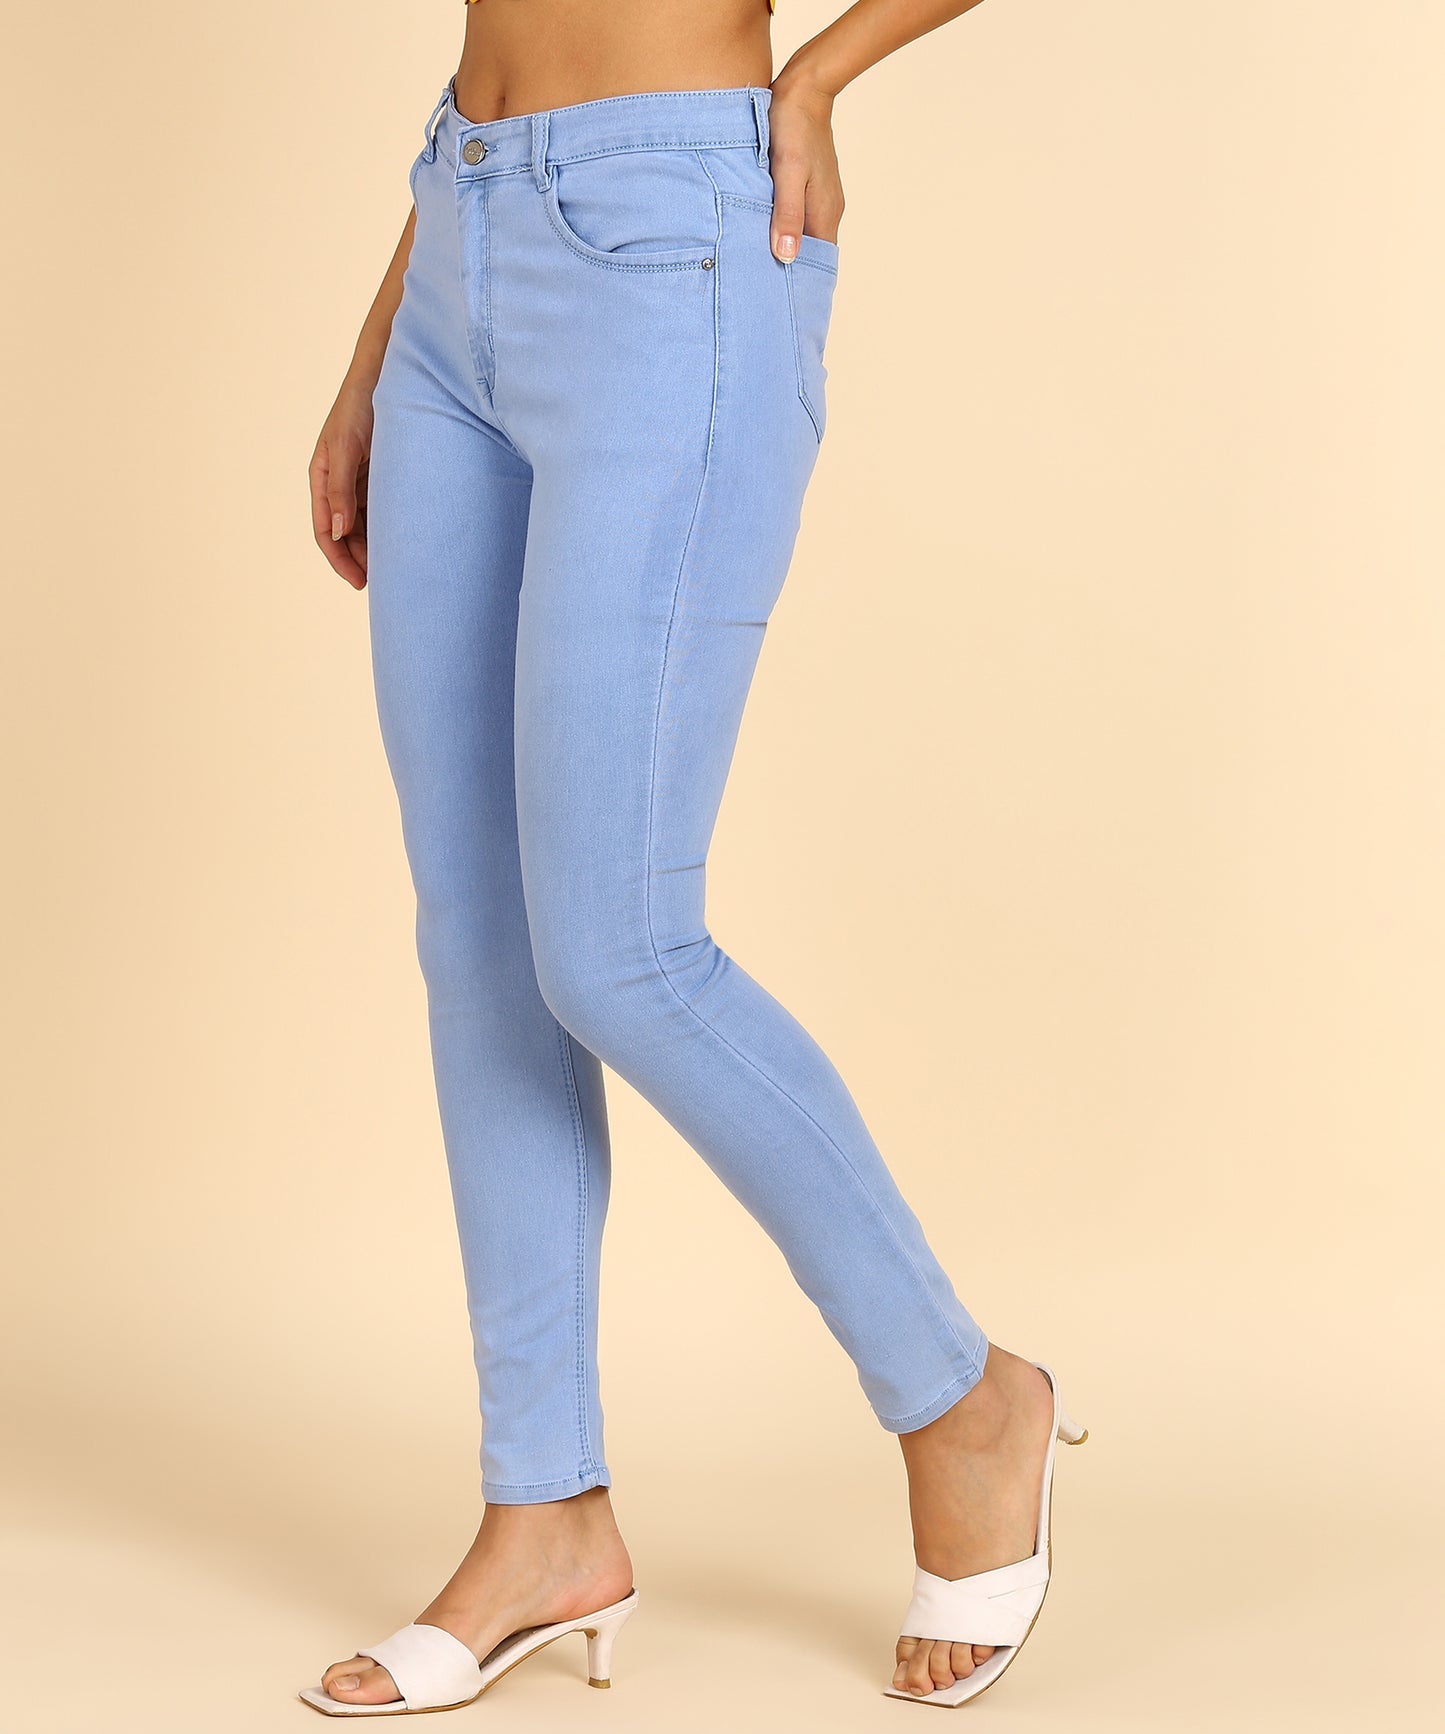 Ice Blue High Rise Slim Fit Skinny Jeans- 5100